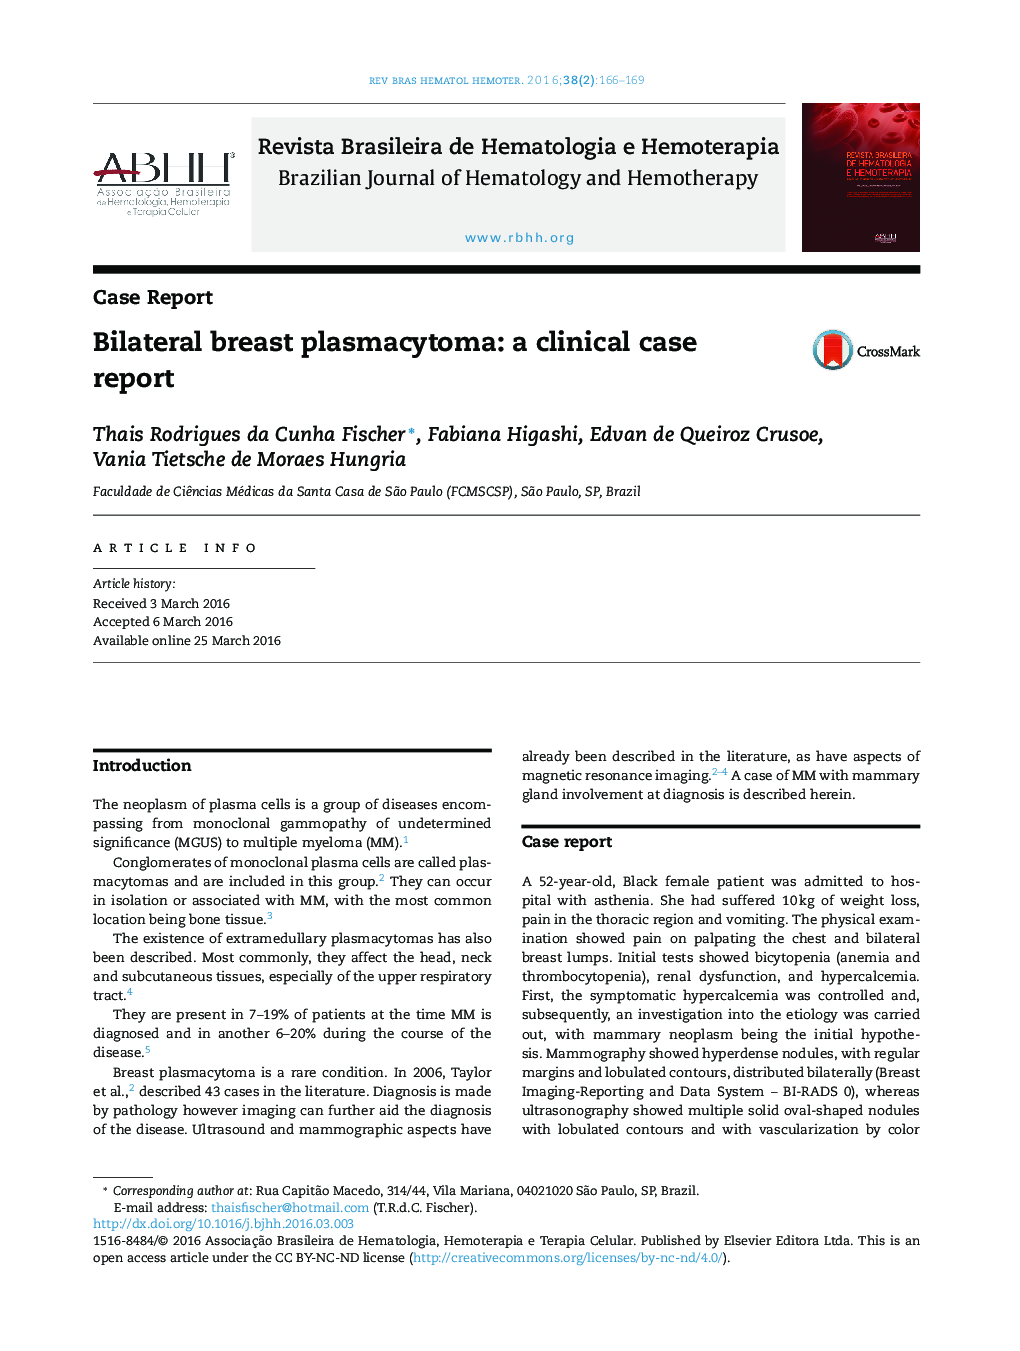 Bilateral breast plasmacytoma: a clinical case report